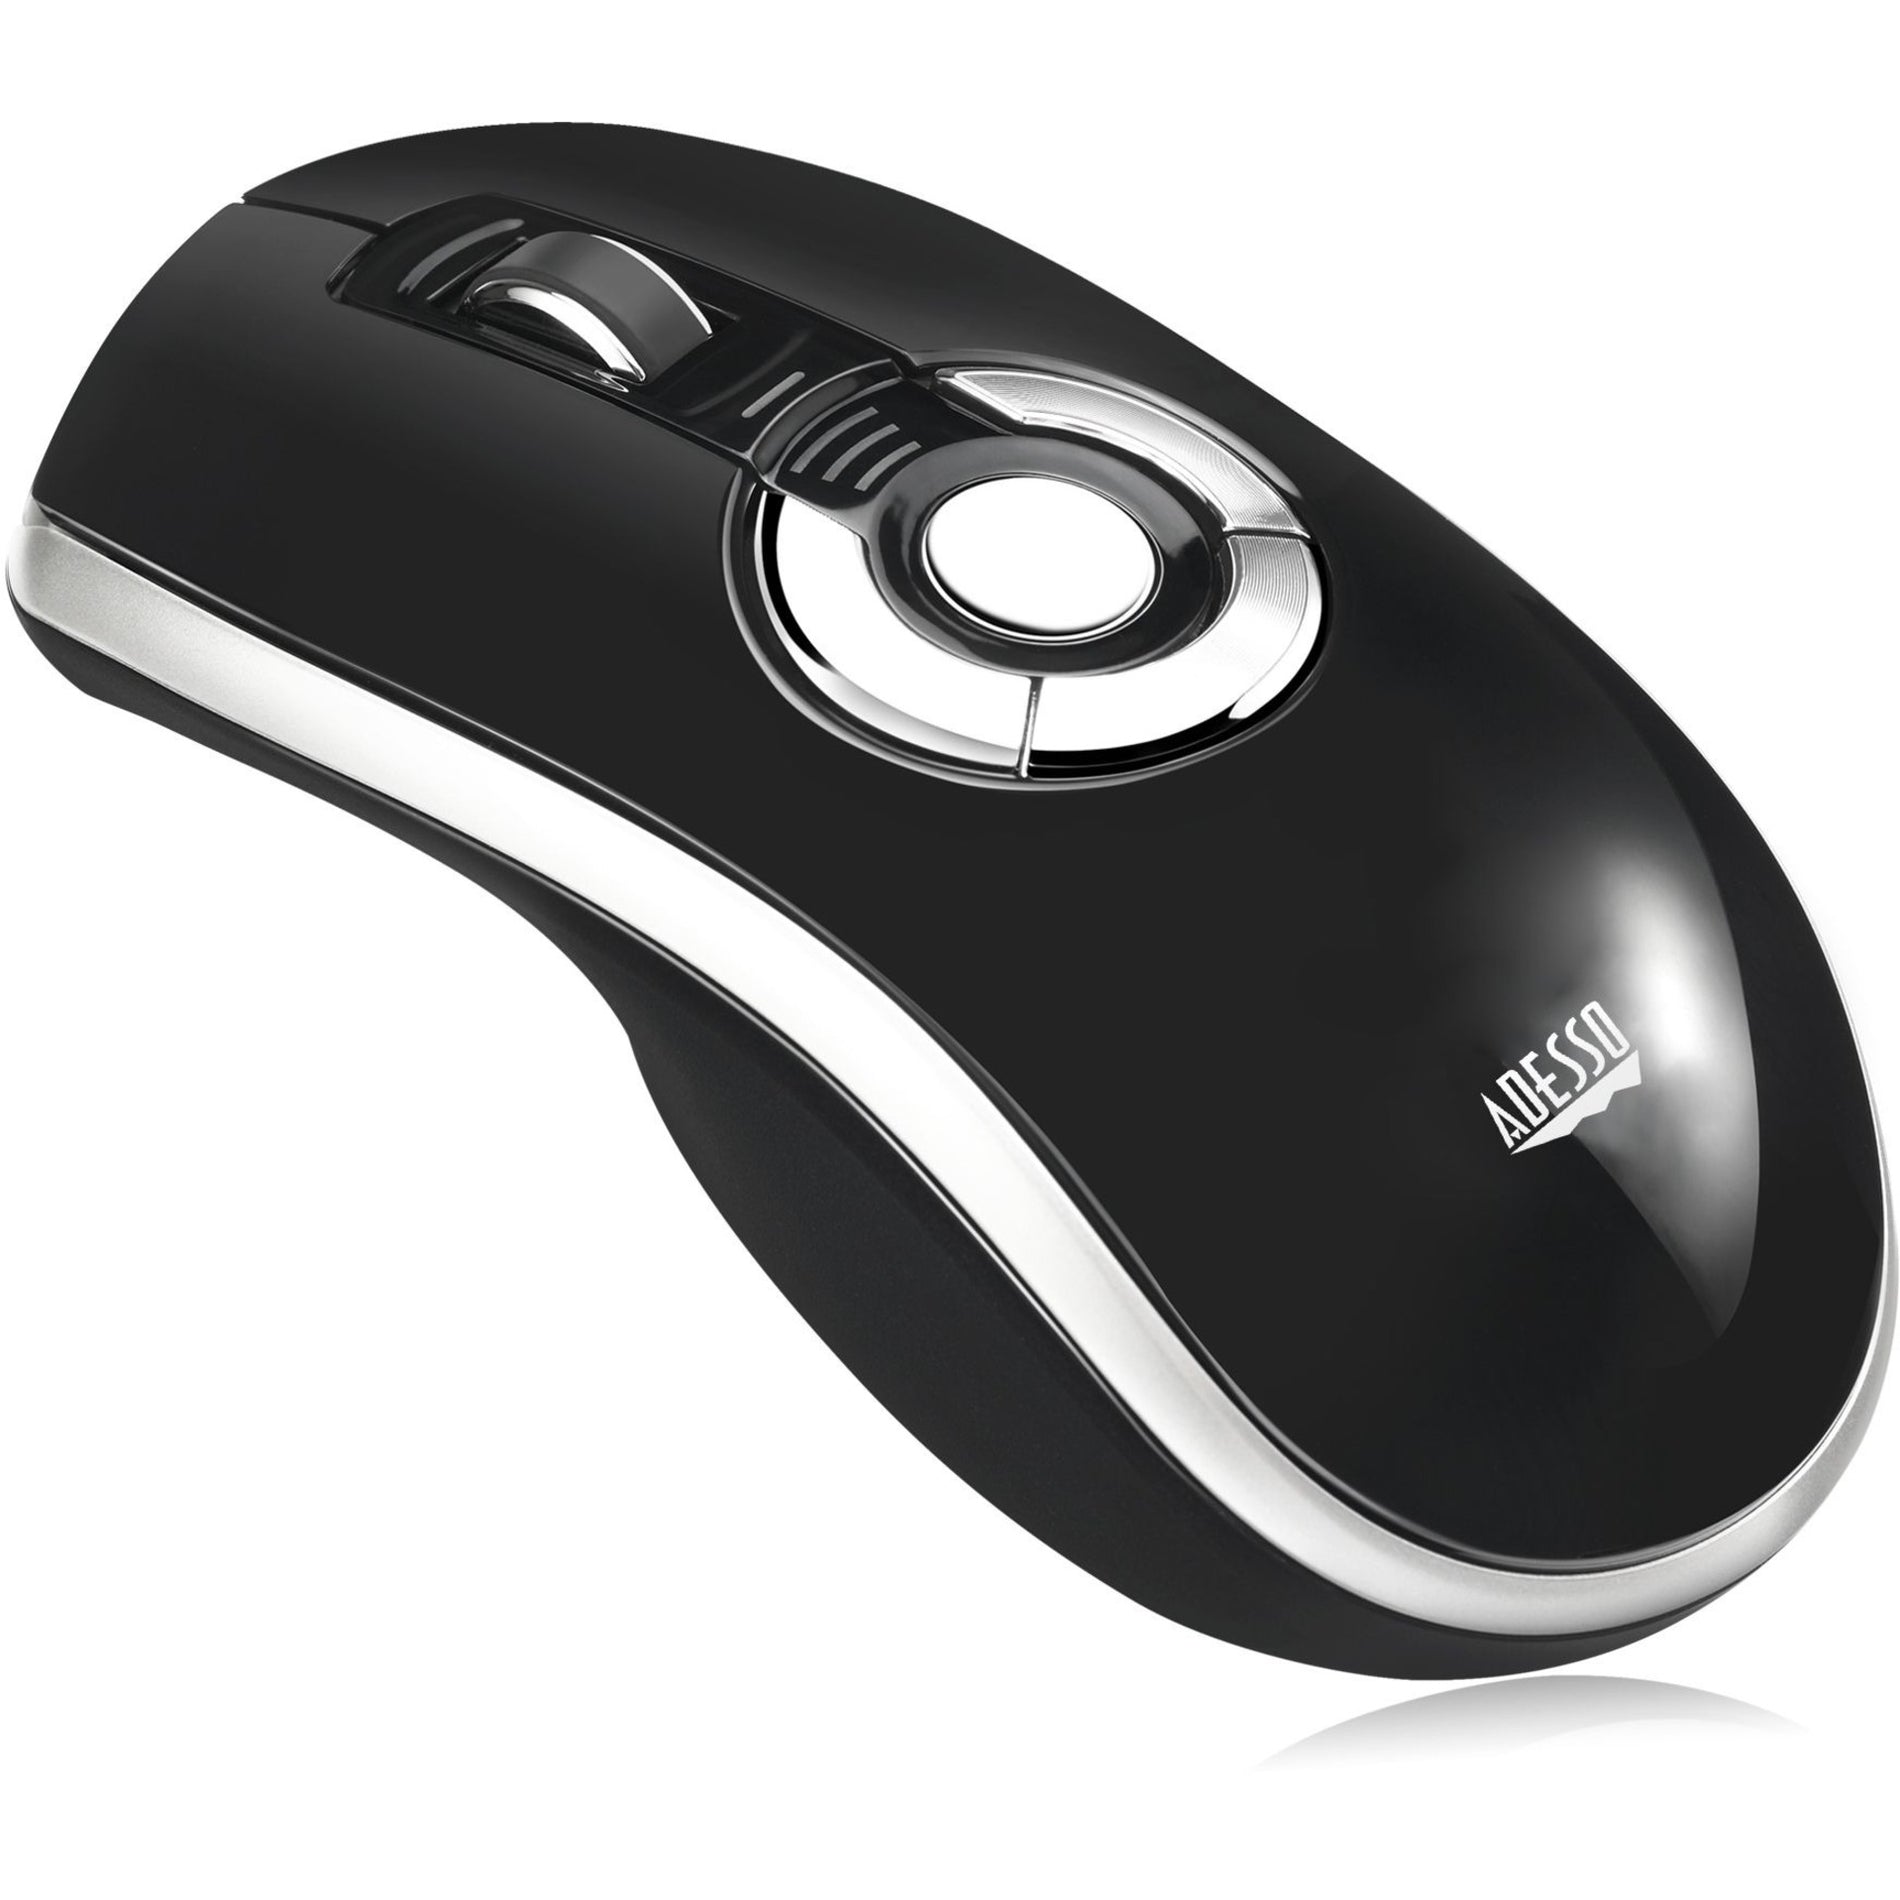 Adesso iMouse P20 Mouse/Presentation Pointer, Wireless Rechargeable Air Mouse Elite for Desktop Computer